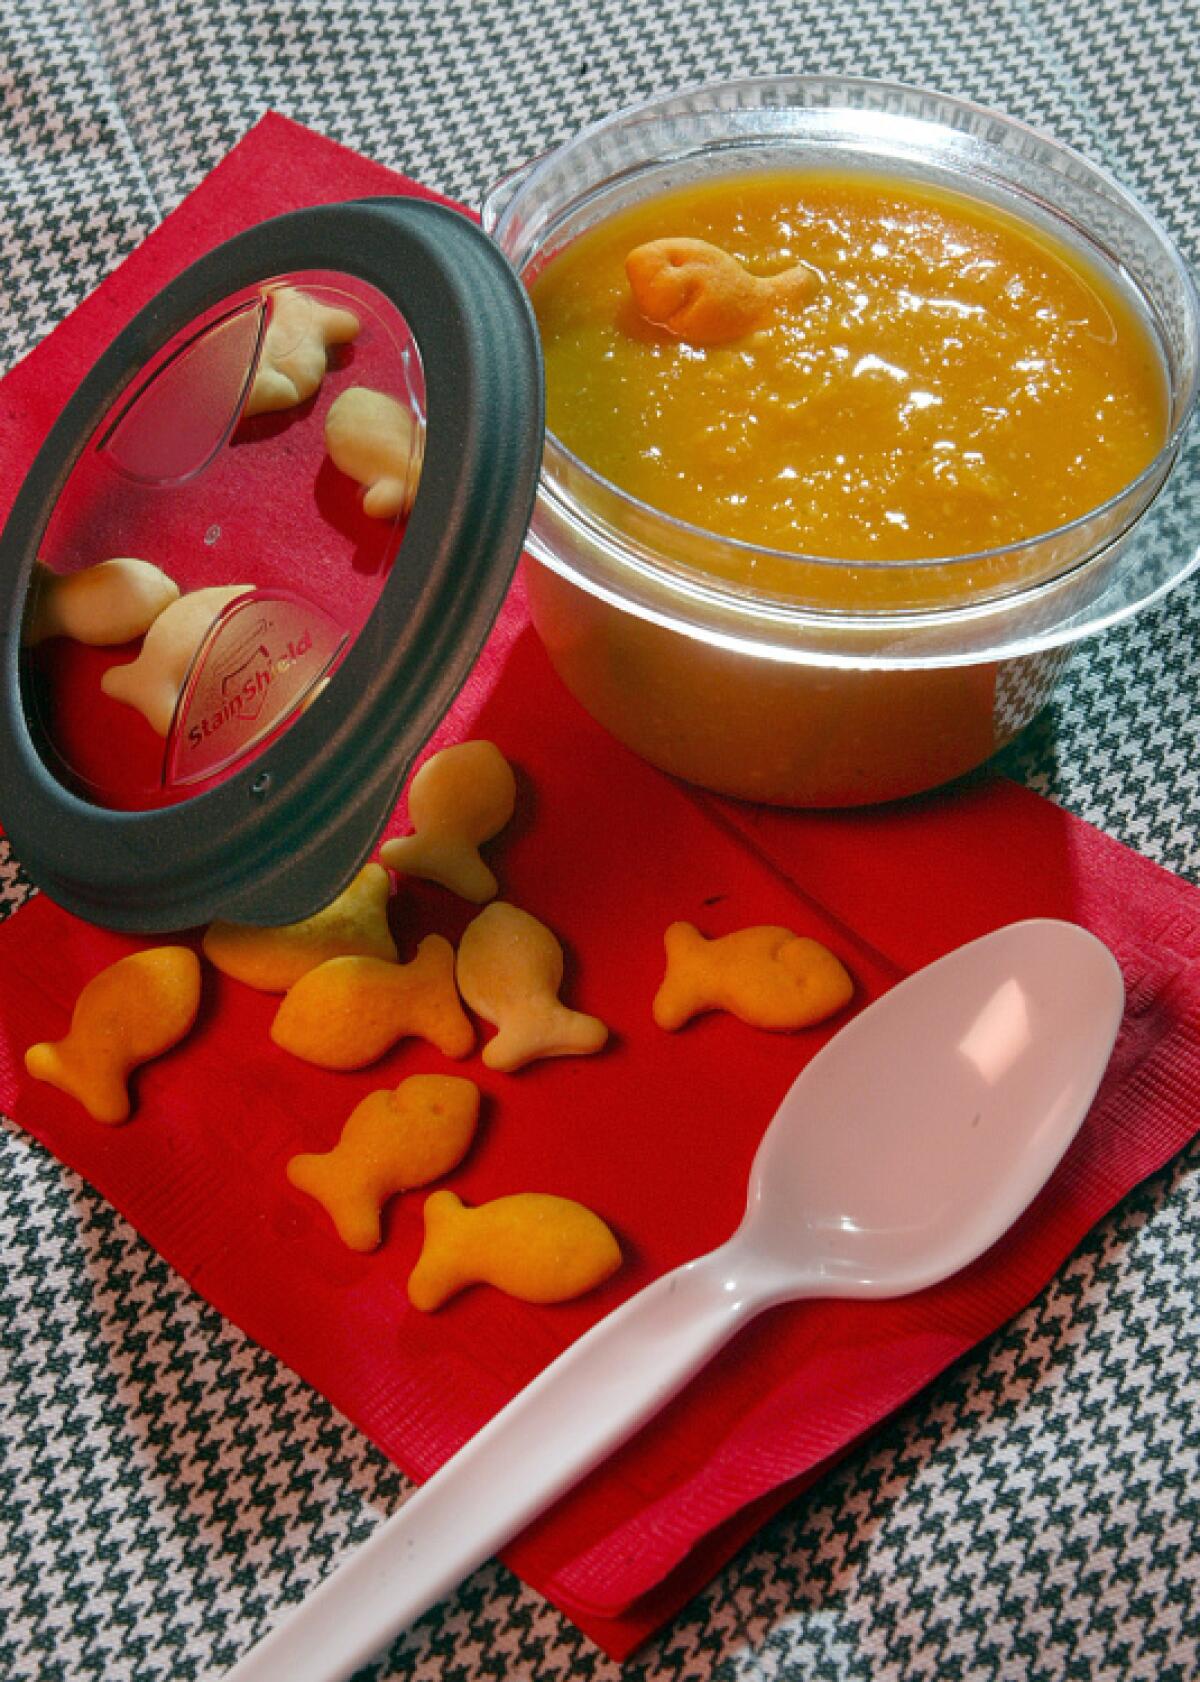 Butternut squash and corn soup is Jean François Meteigner's easy way to sneak vegetables into a meal.